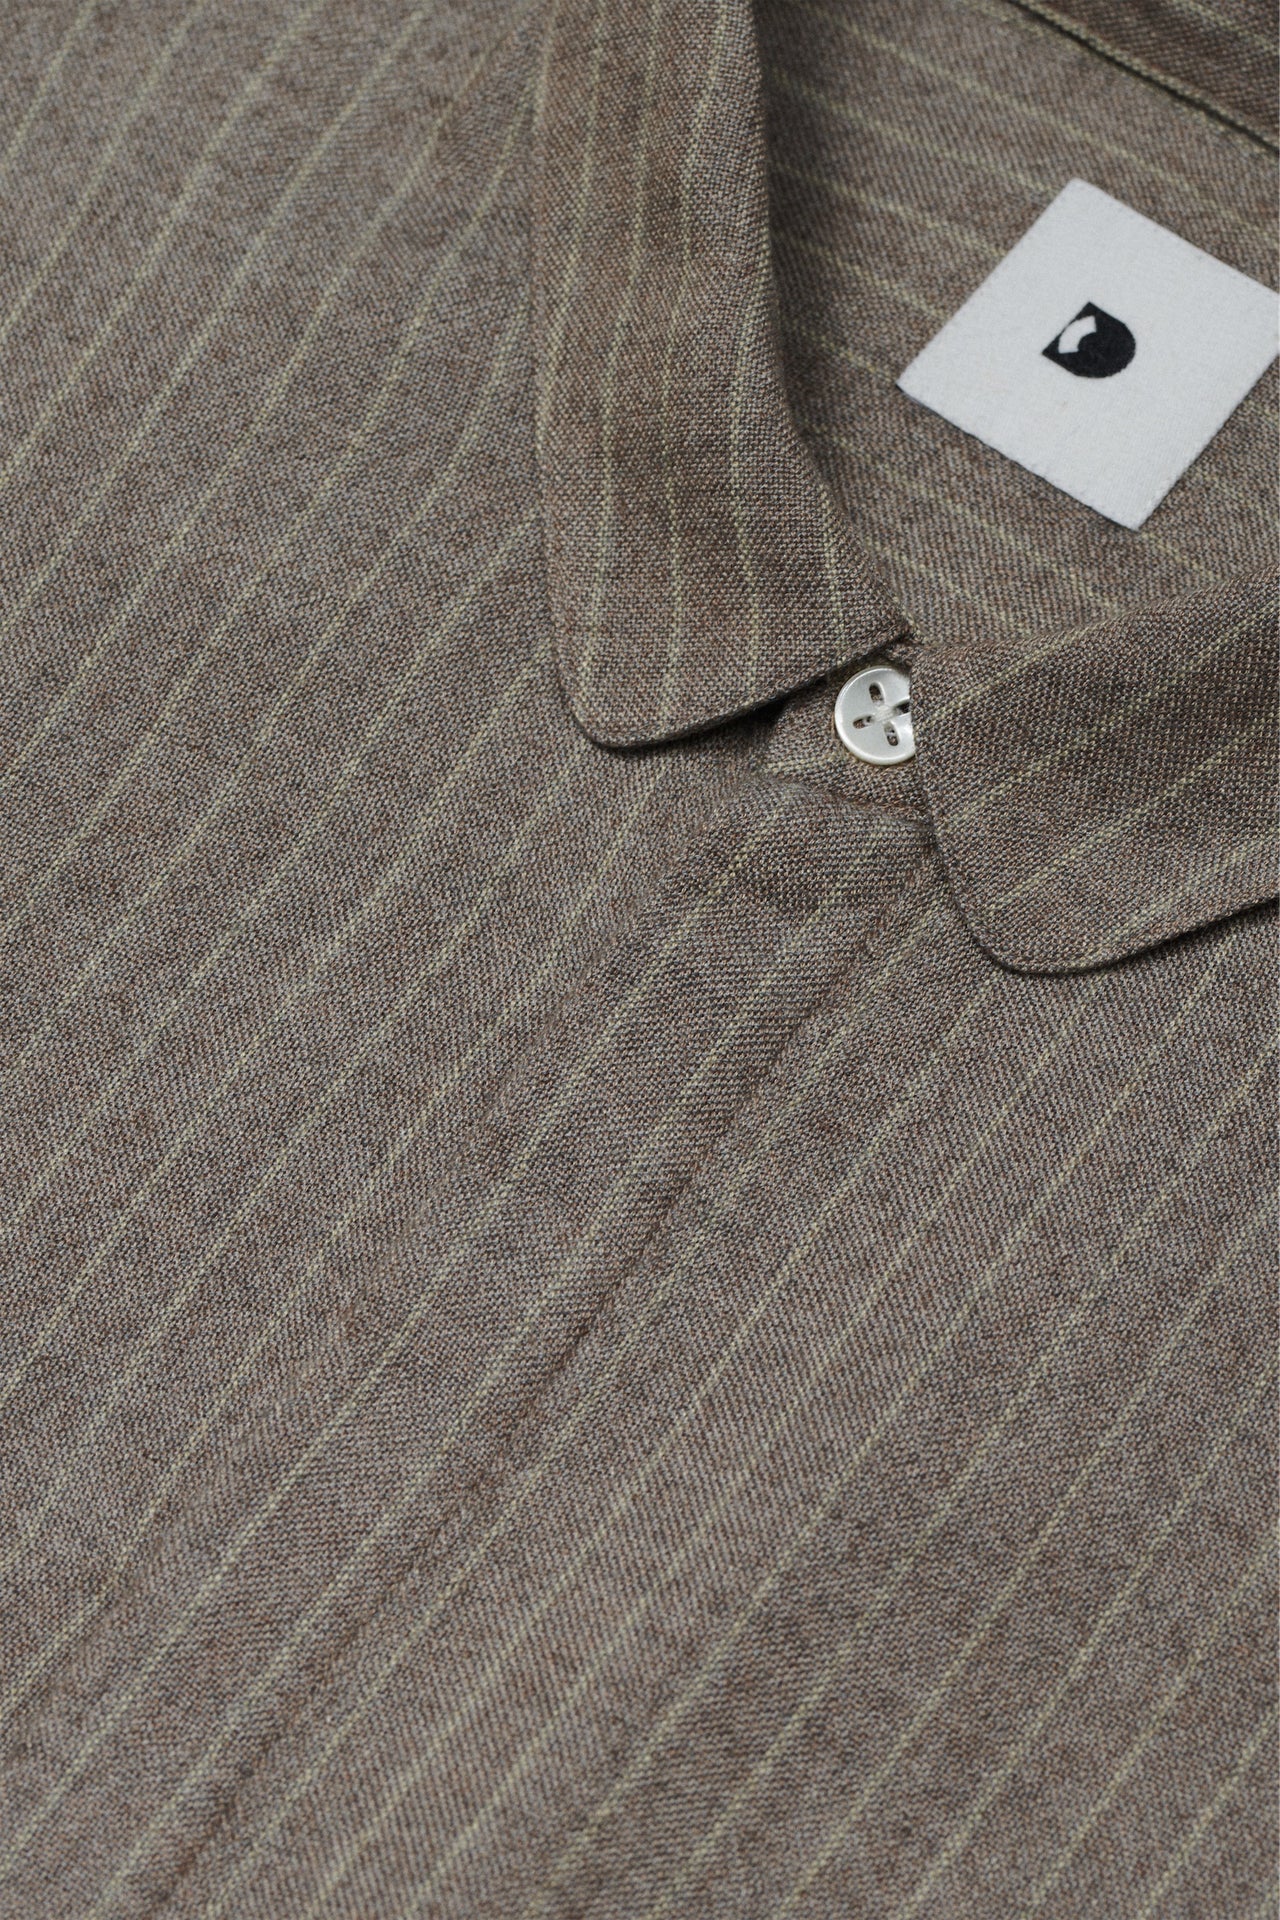 Cute Shirt in the Finest Mix of Portuguese Merino Wool and Modal